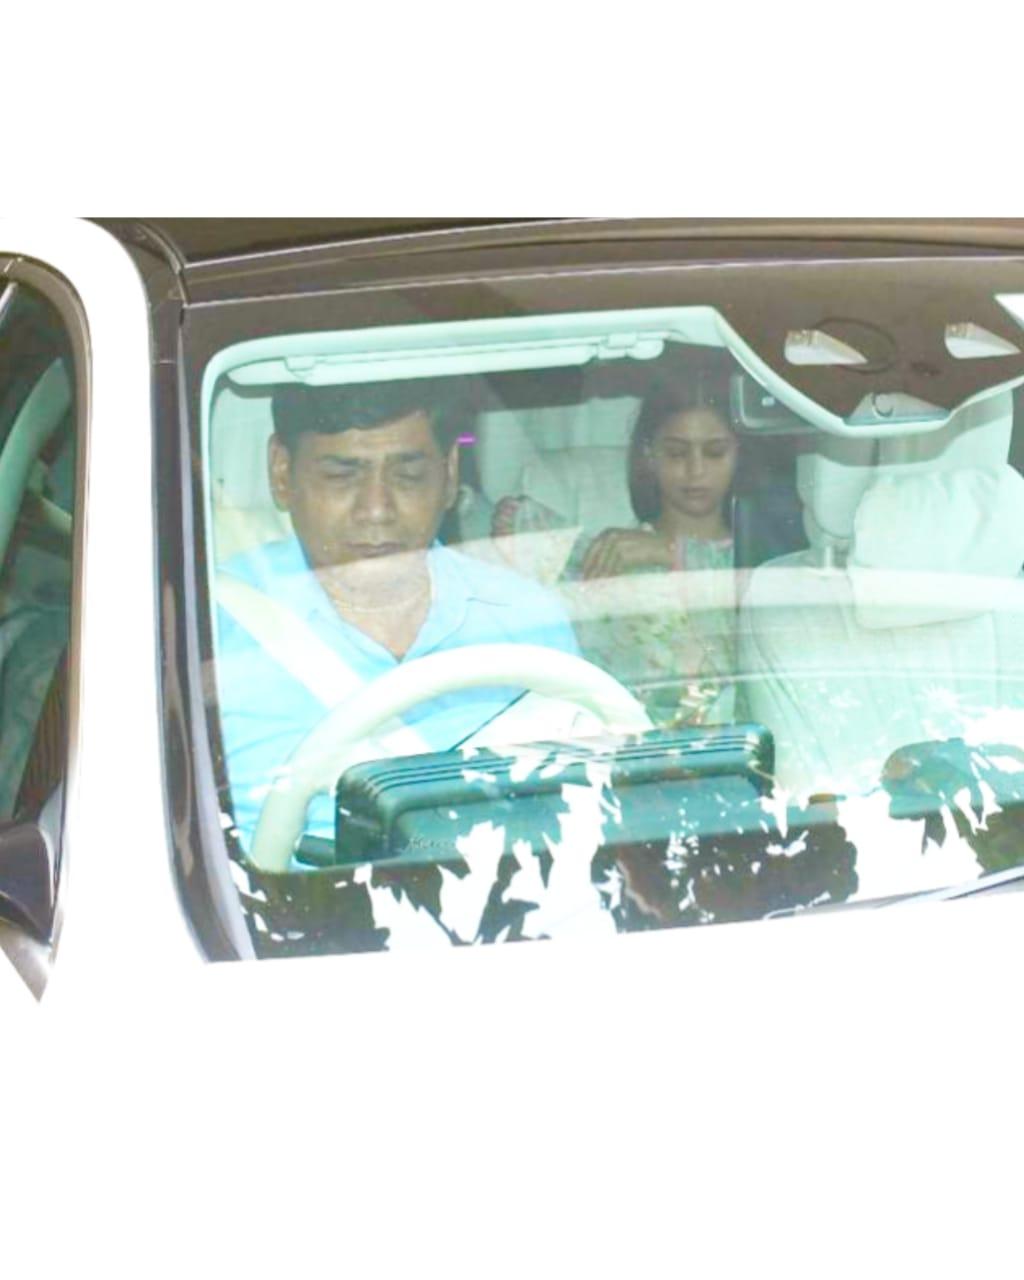 Suhana Khan and Shah Rukh Khan were both spotted paying their final respects too